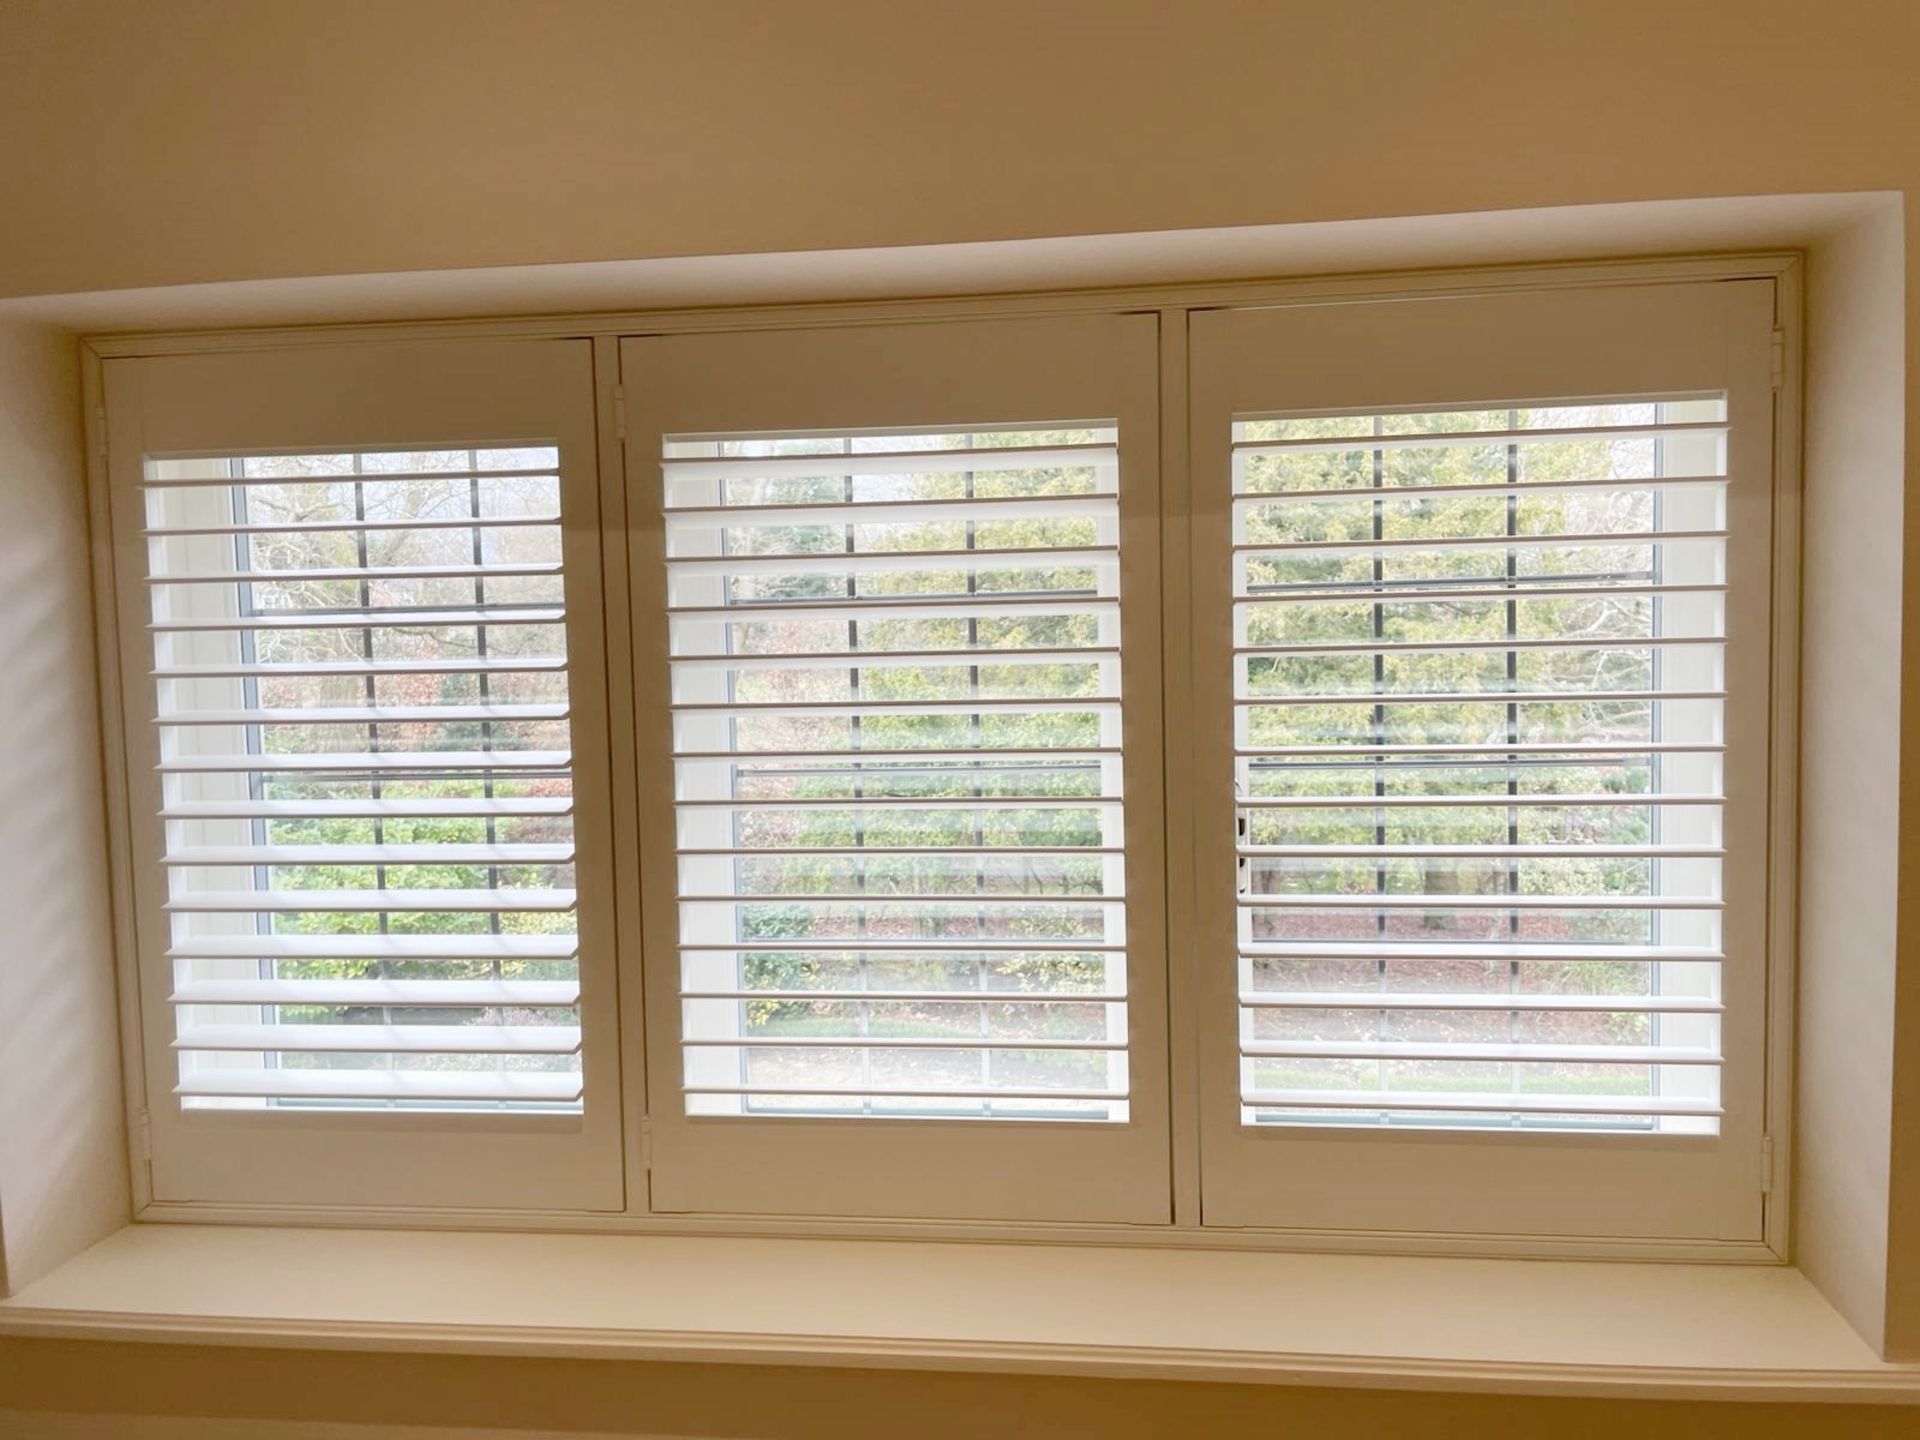 1 x Hardwood Timber Double Glazed Leaded 3-Pane Window Frame fitted with Shutter Blinds - Image 11 of 17